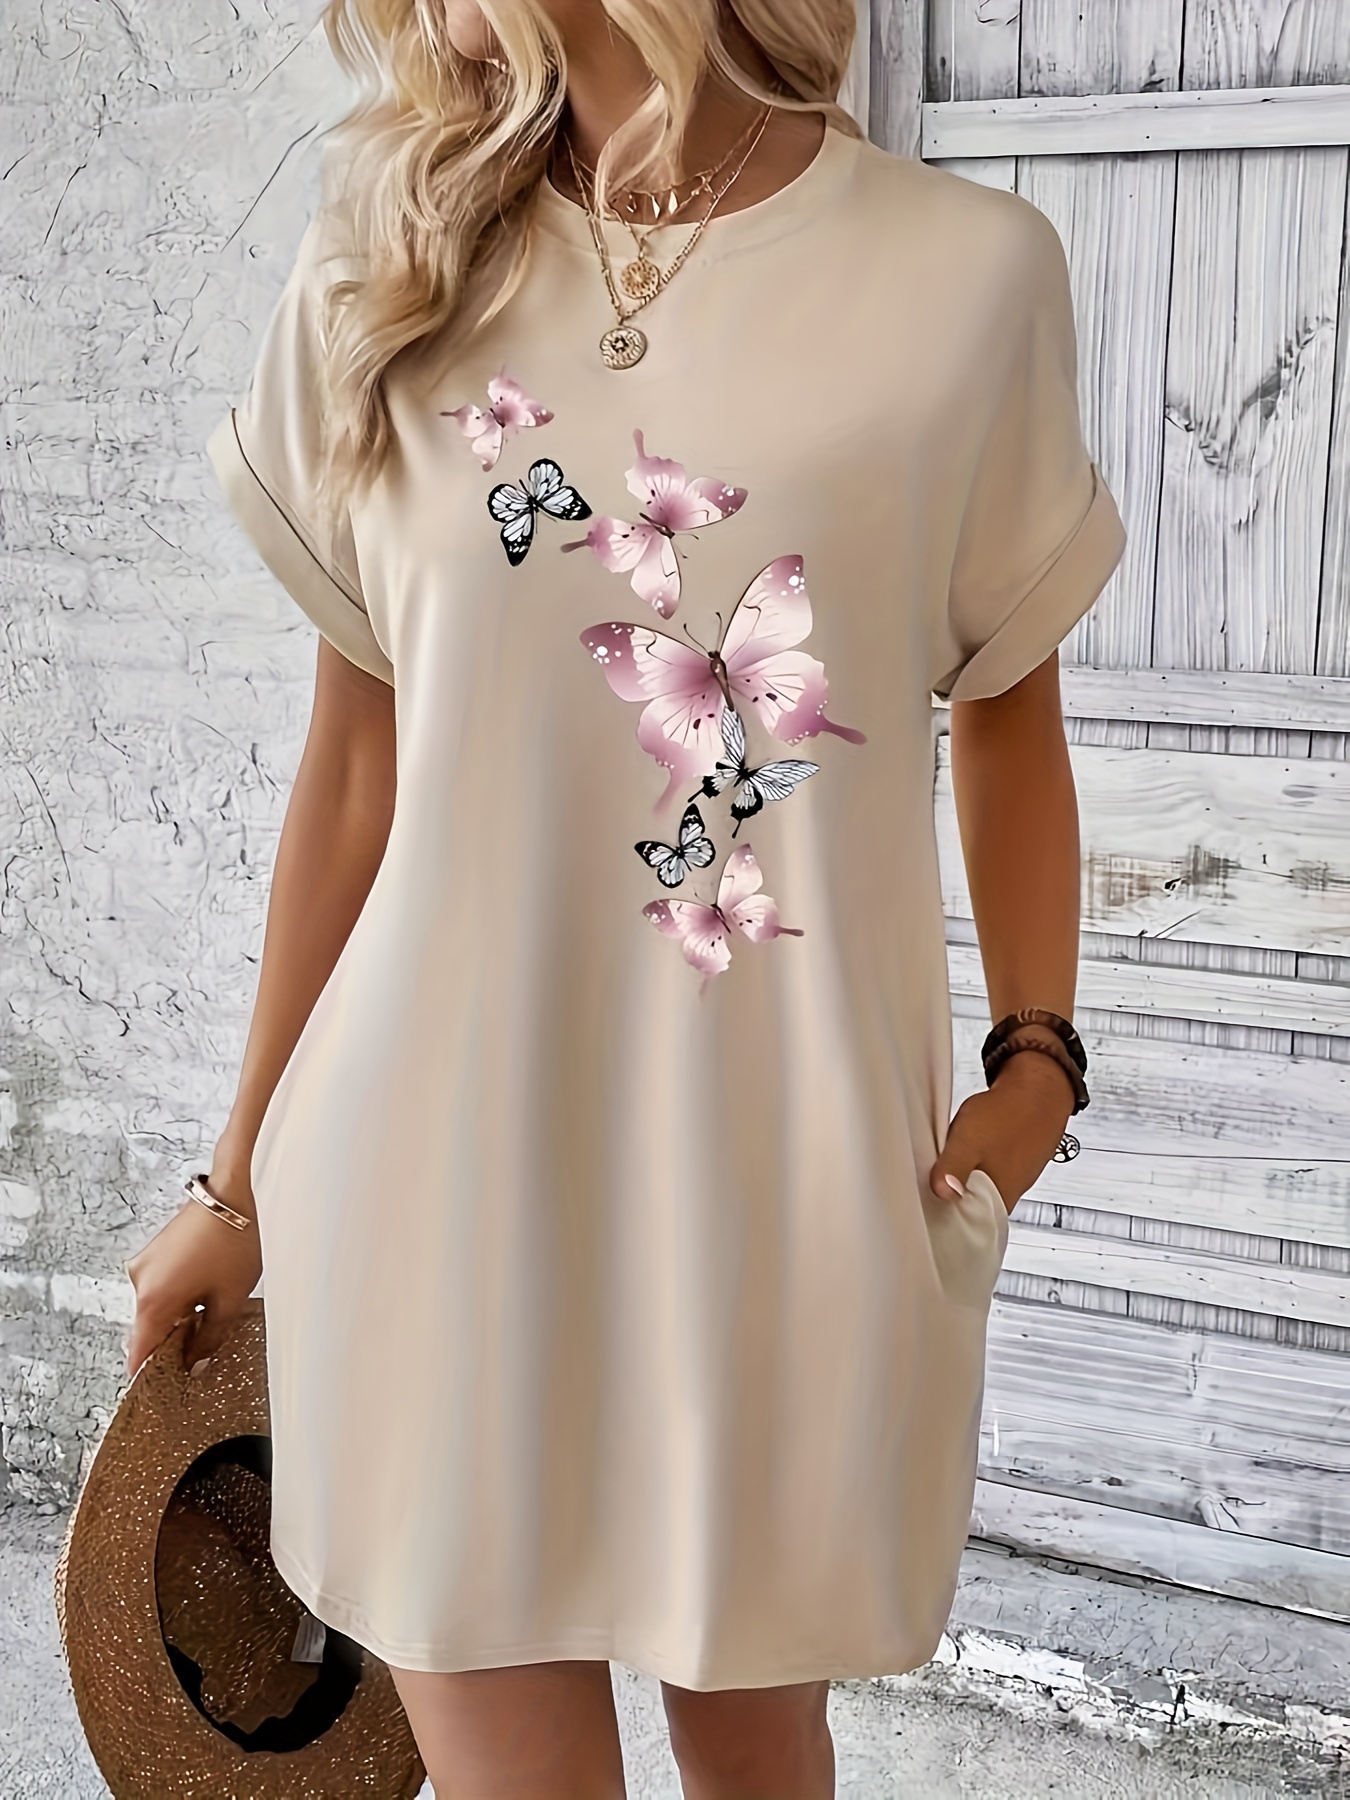 floral print crew neck dress casual short sleeve dress for spring summer womens clothing details 0